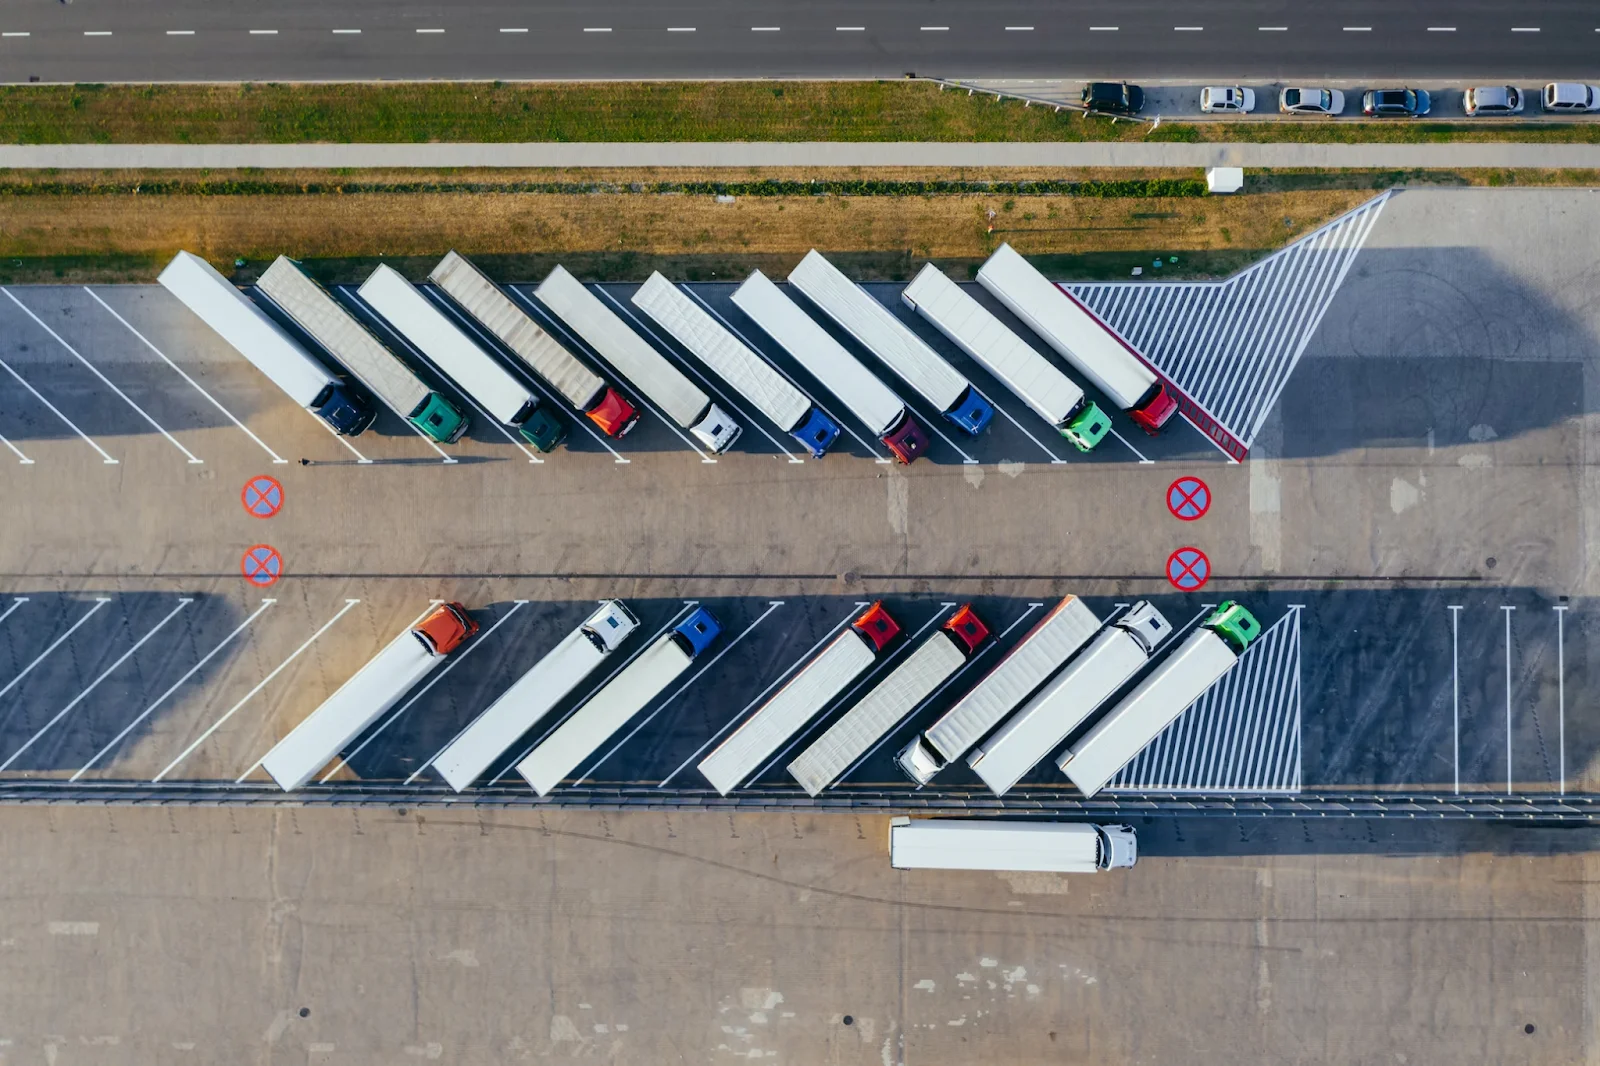 A bird’s eye view of truck trailers at the truck parking area